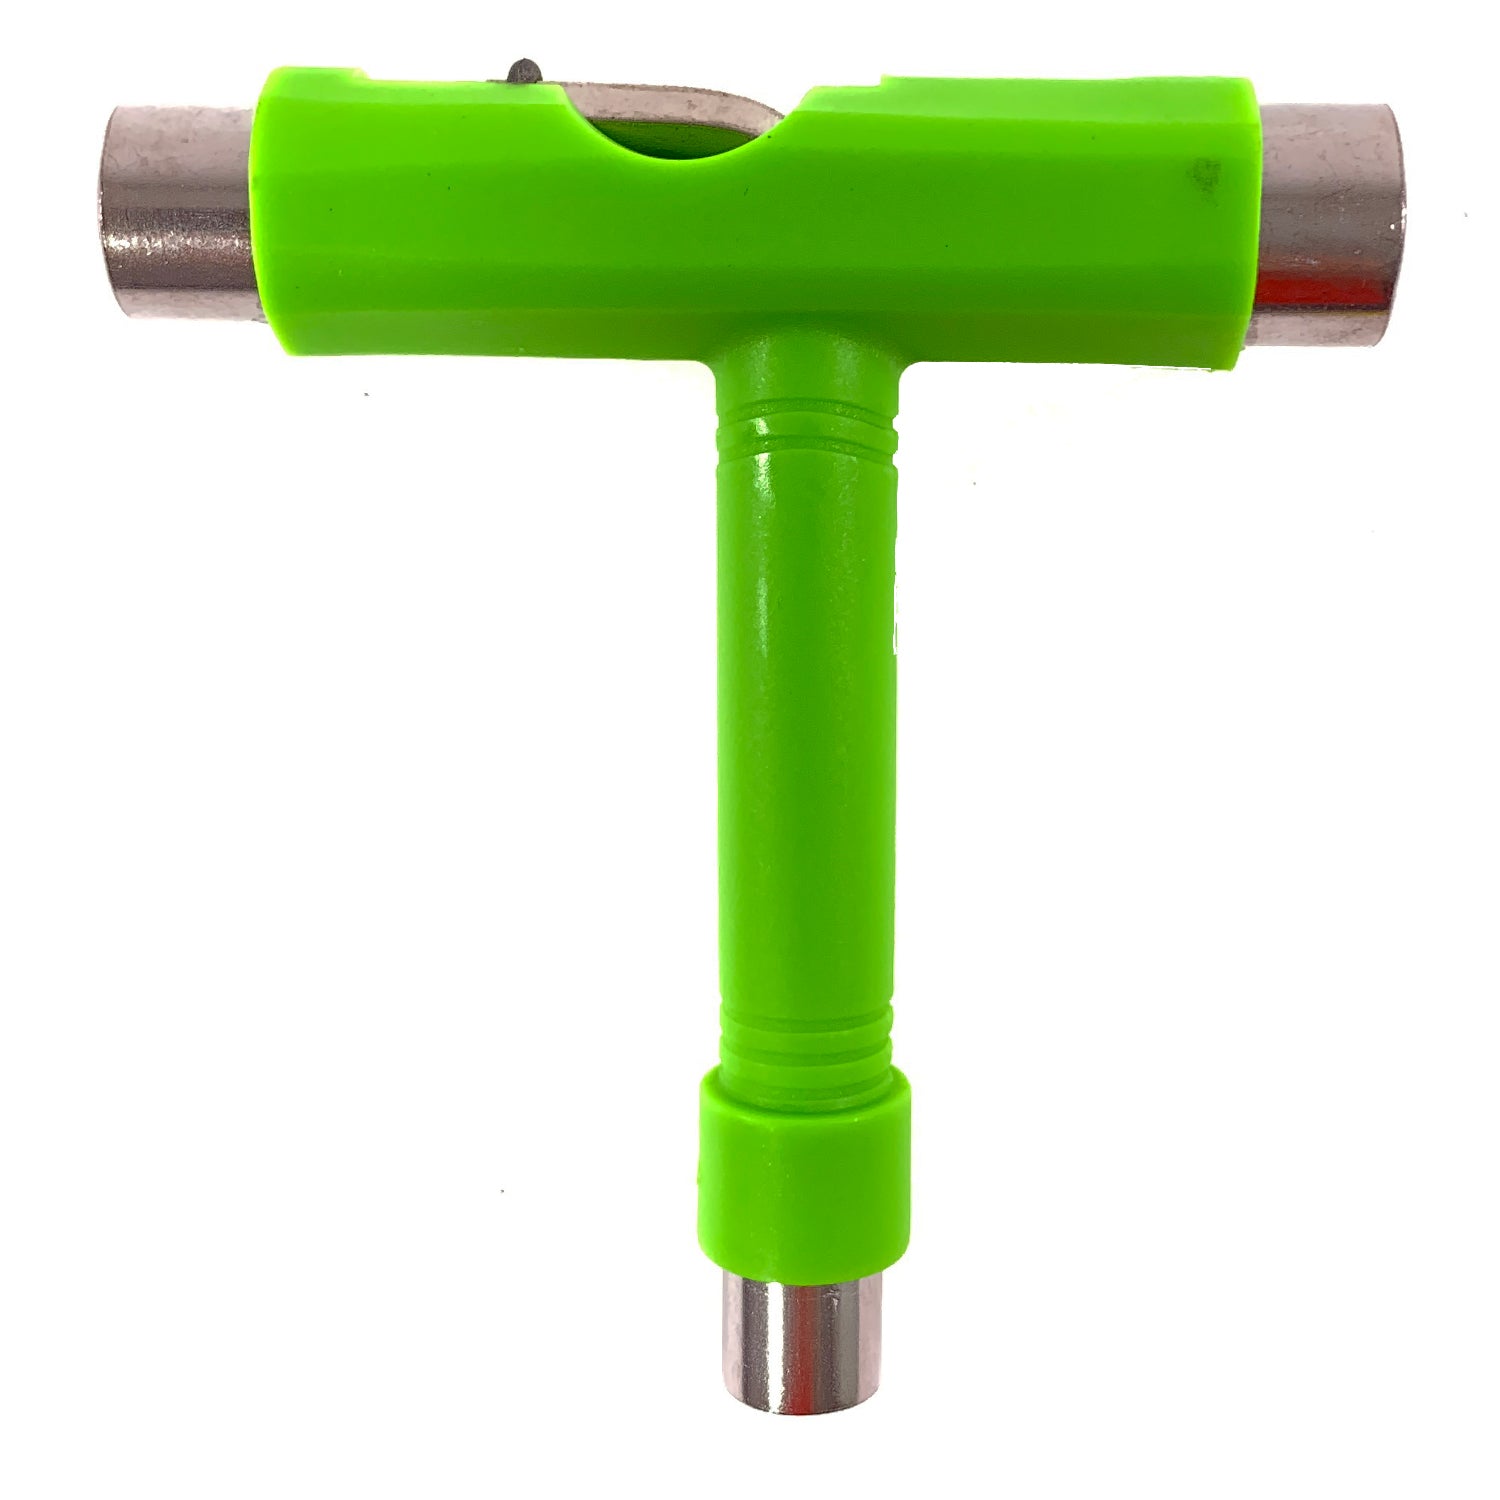 G-Tool - Green - Prime Delux Store